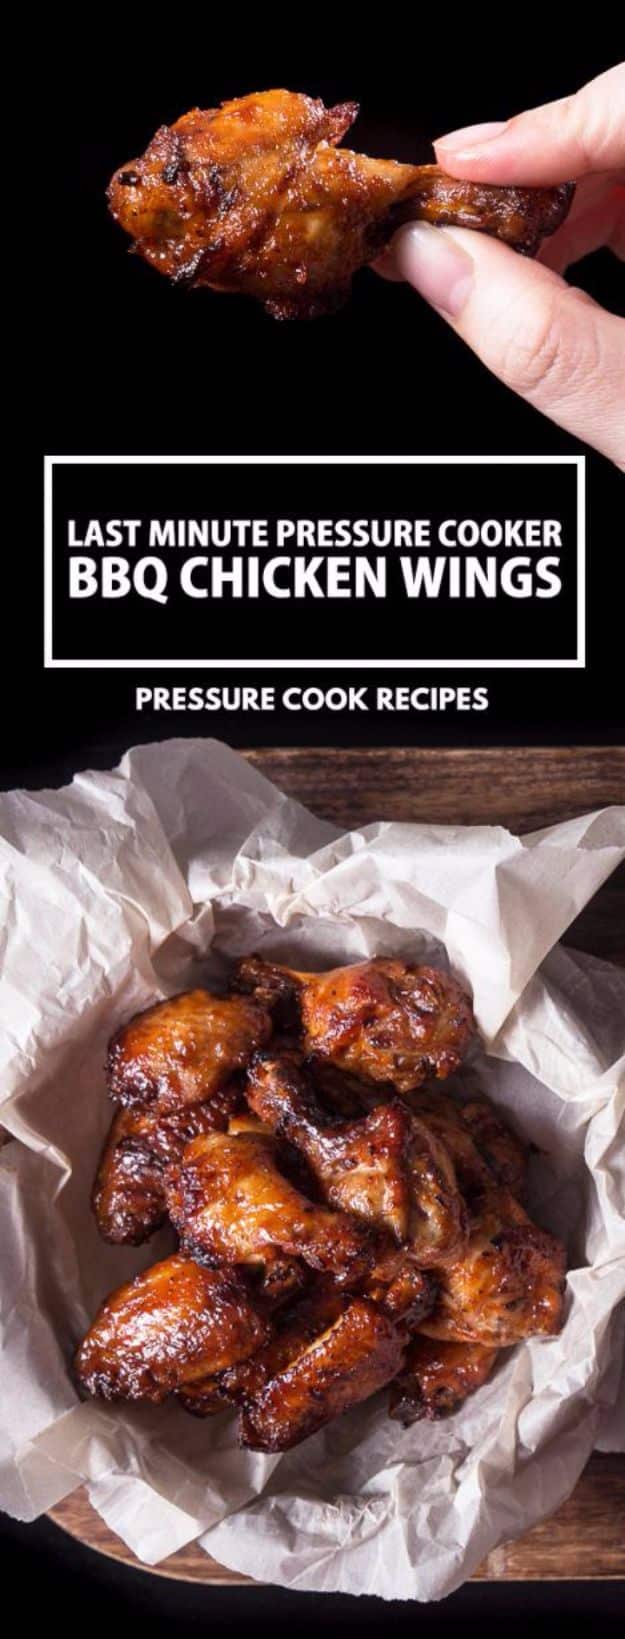 Best Barbecue Recipes - Lifesaver BBQ Pressure Cooker Chicken Wings - Easy BBQ Recipe Ideas for Lunch, Dinner and Quick Party Appetizers - Grilled and Smoked Foods, Chicken, Beef and Meat, Fish and Vegetable Ideas for Grilling - Sauces and Rubs, Seasonings and Favorite Bar BBQ Tips #bbq #bbqrecipes #grilling